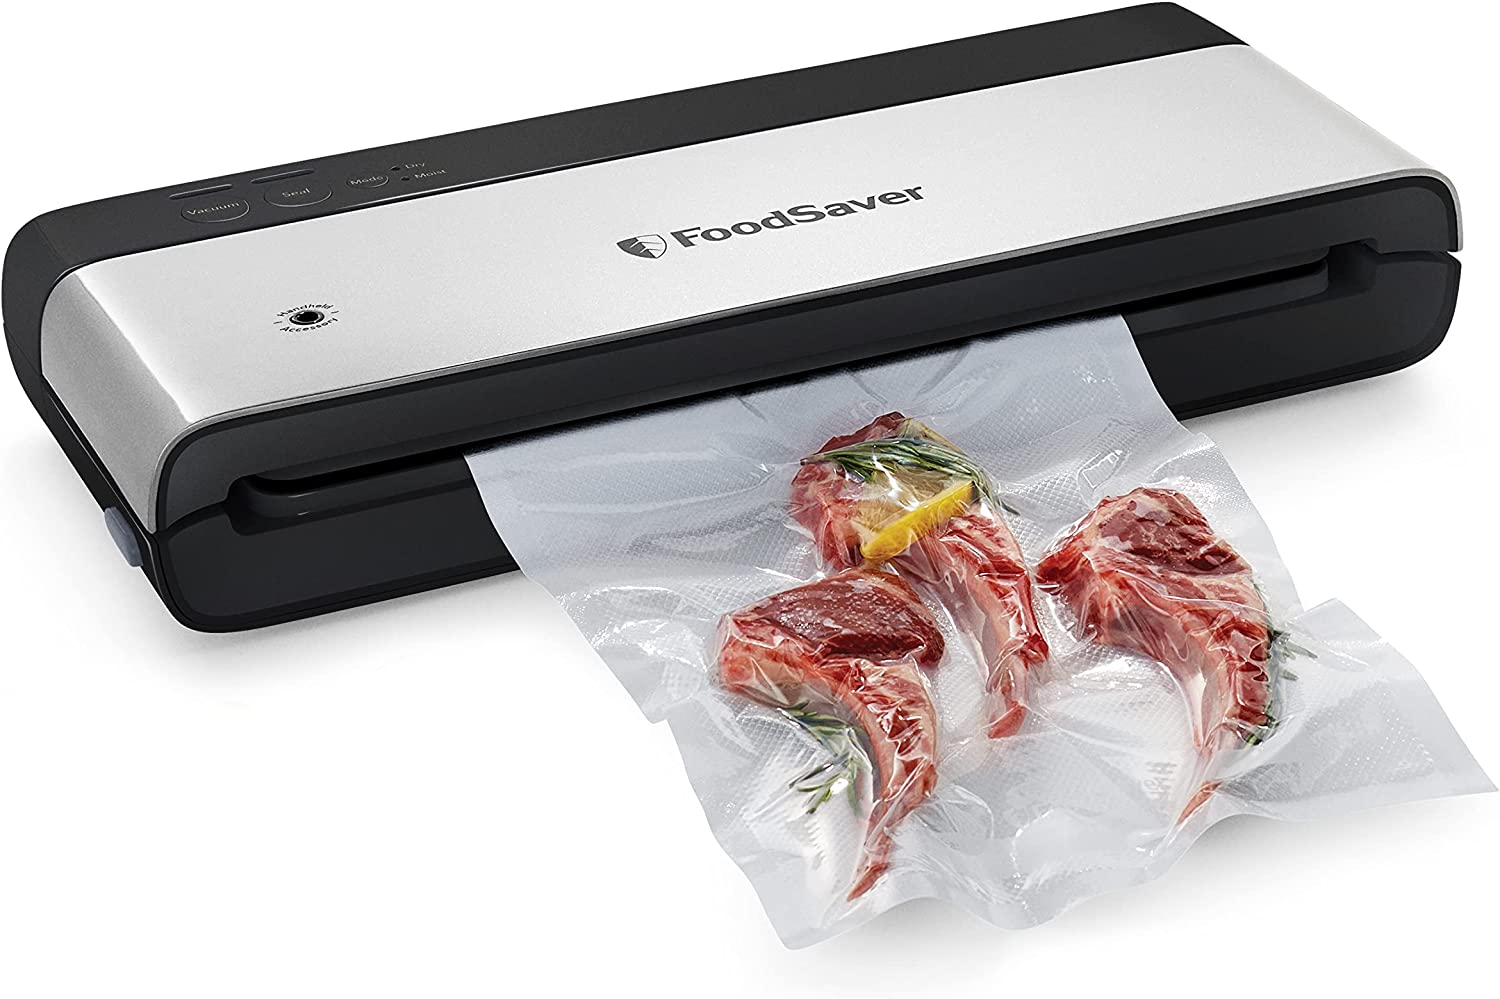 2022 version- How to use the updated POTANE VS2690 vacuum sealer 